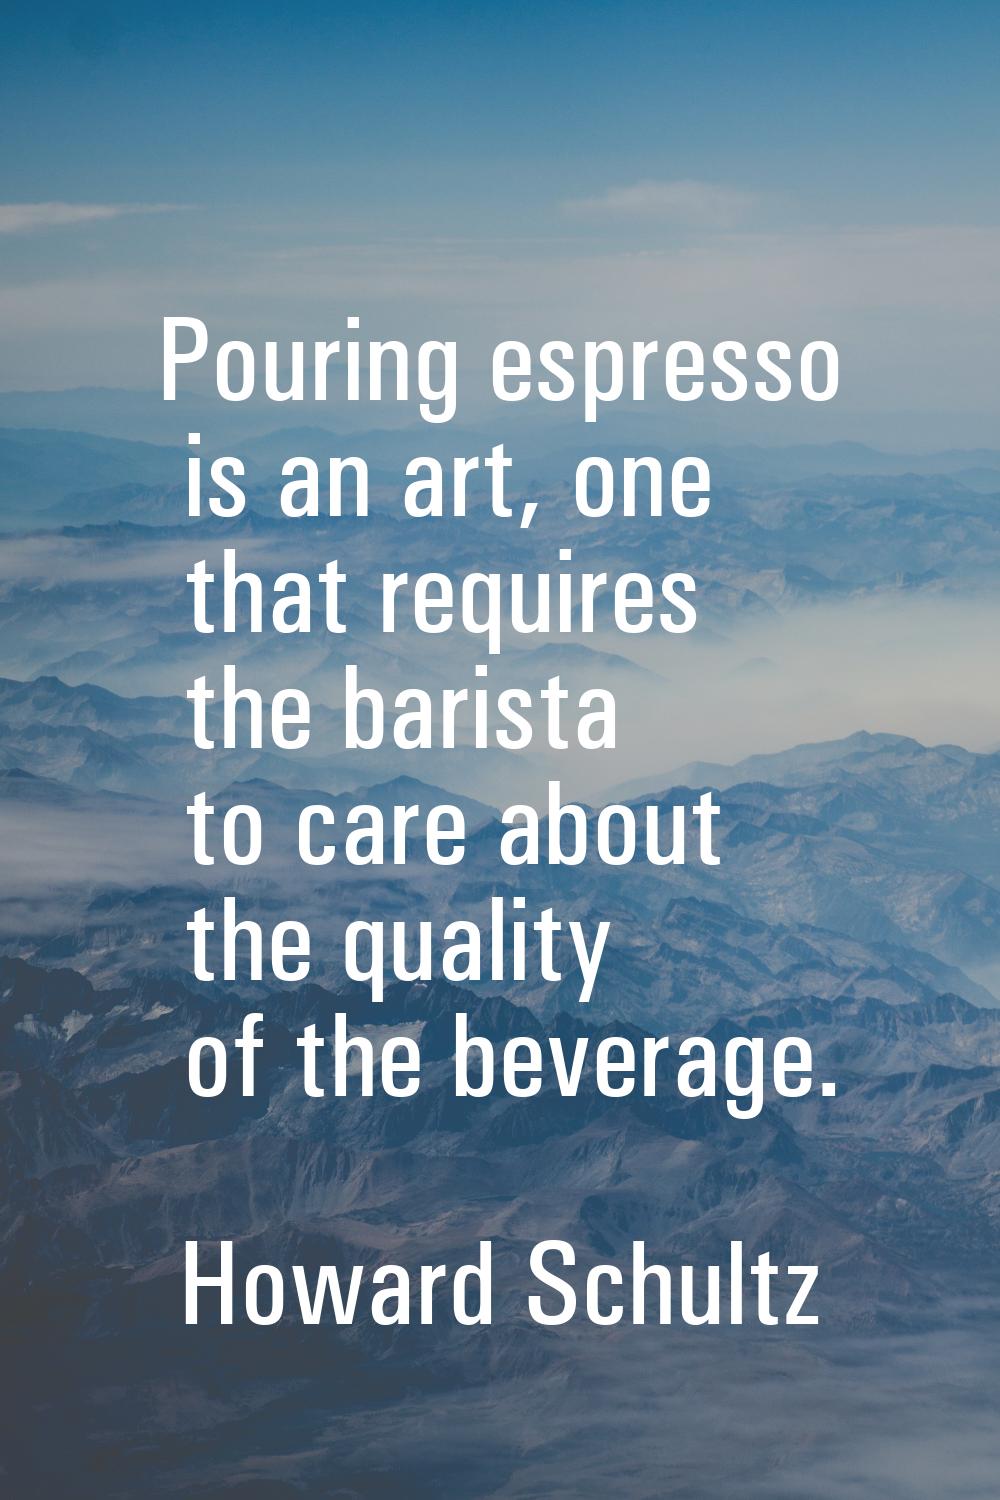 Pouring espresso is an art, one that requires the barista to care about the quality of the beverage